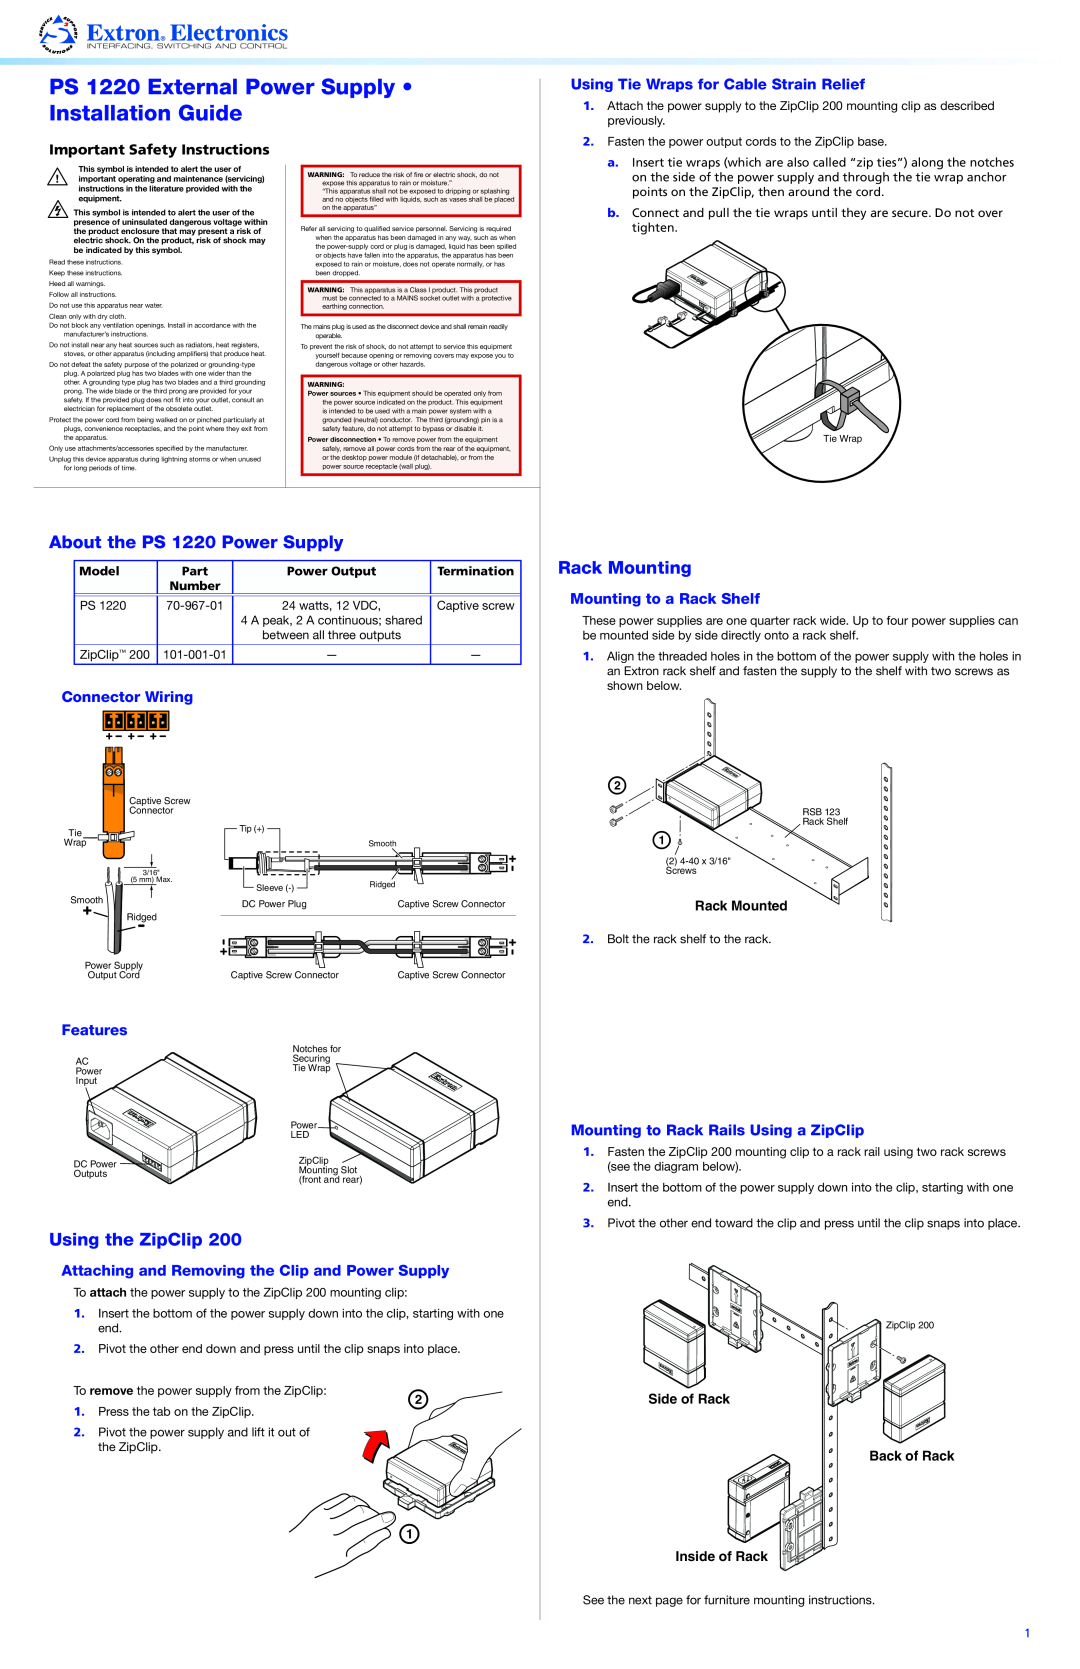 Extron electronic important safety instructions PS 1220 External Power Supply Installation Guide, Rack Mounting, Model 